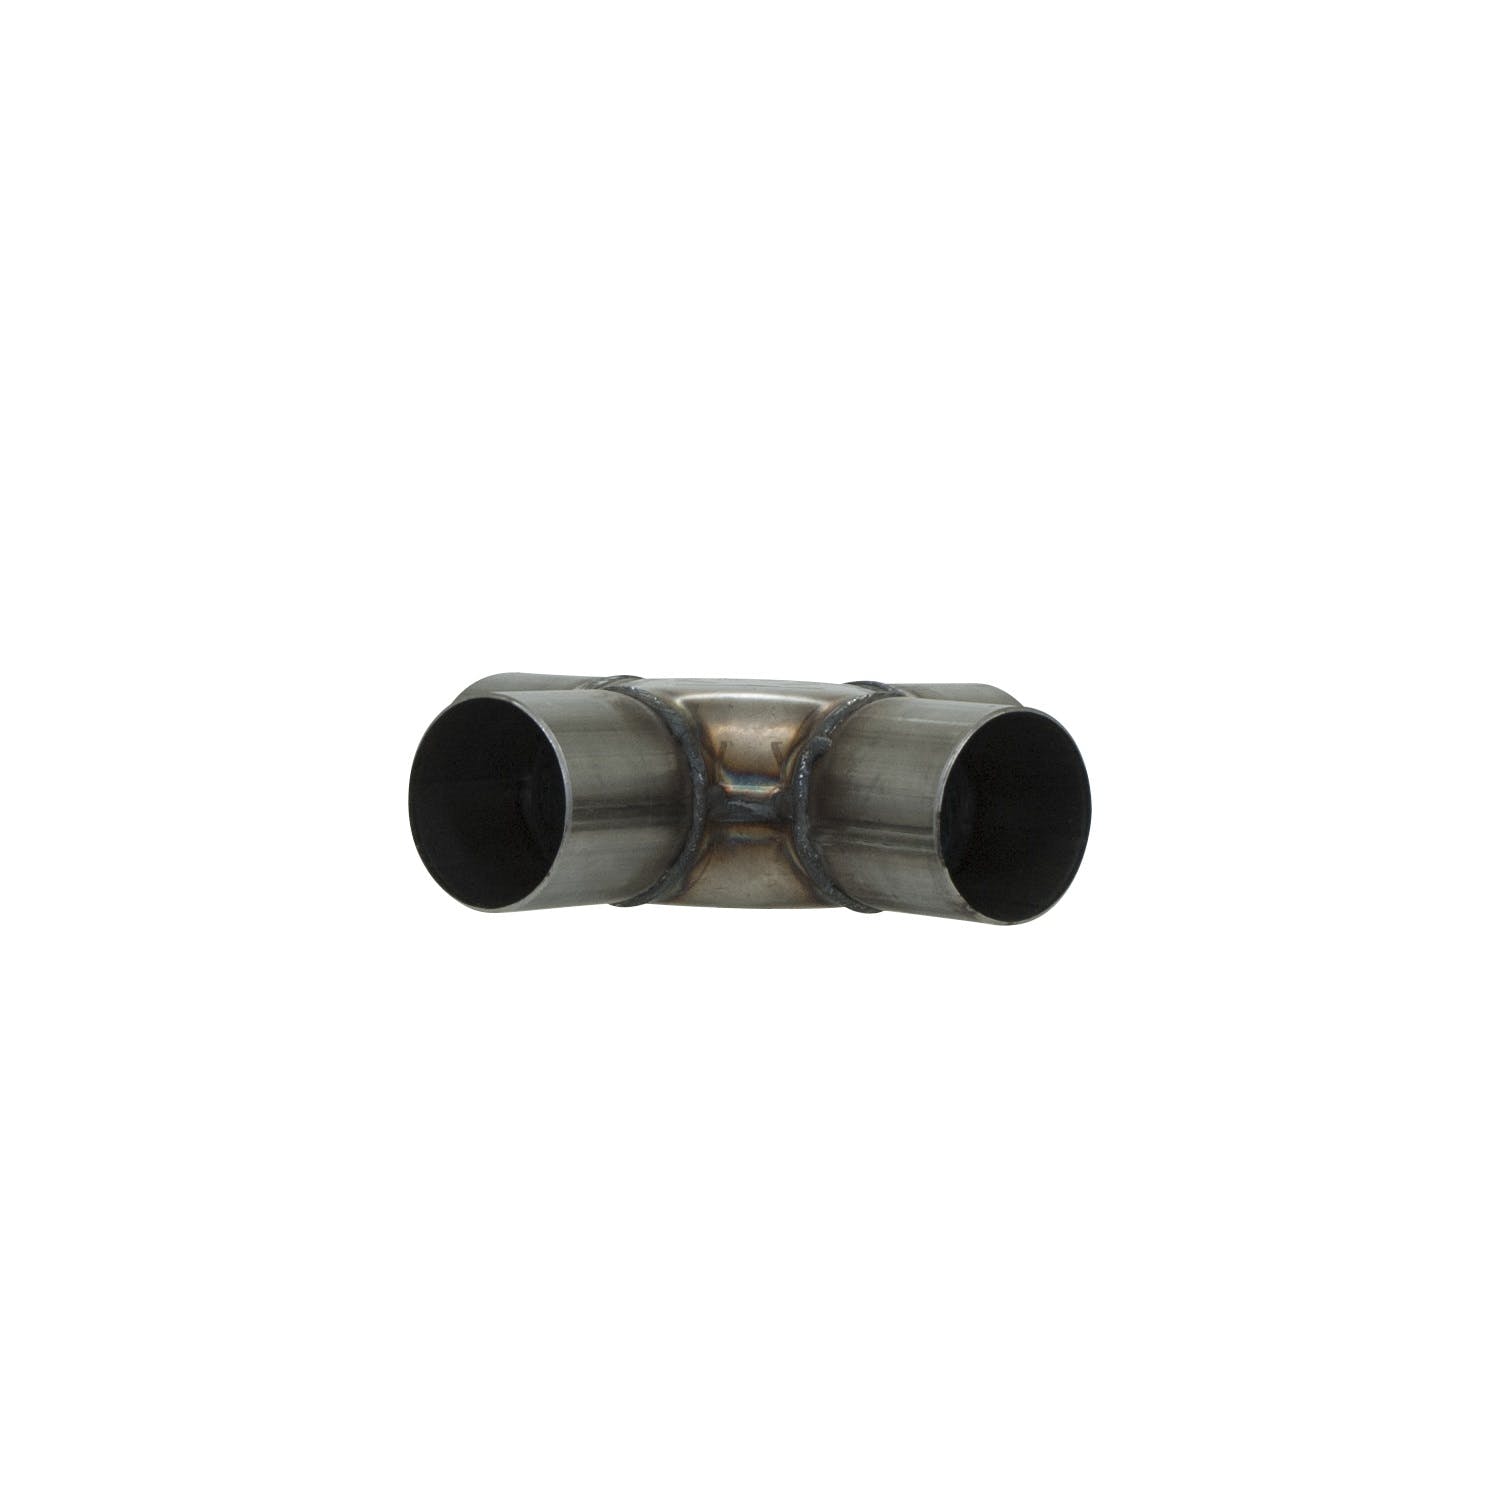 Flowmaster 815952 UNIVERSAL X-PIPE 2.25 409S